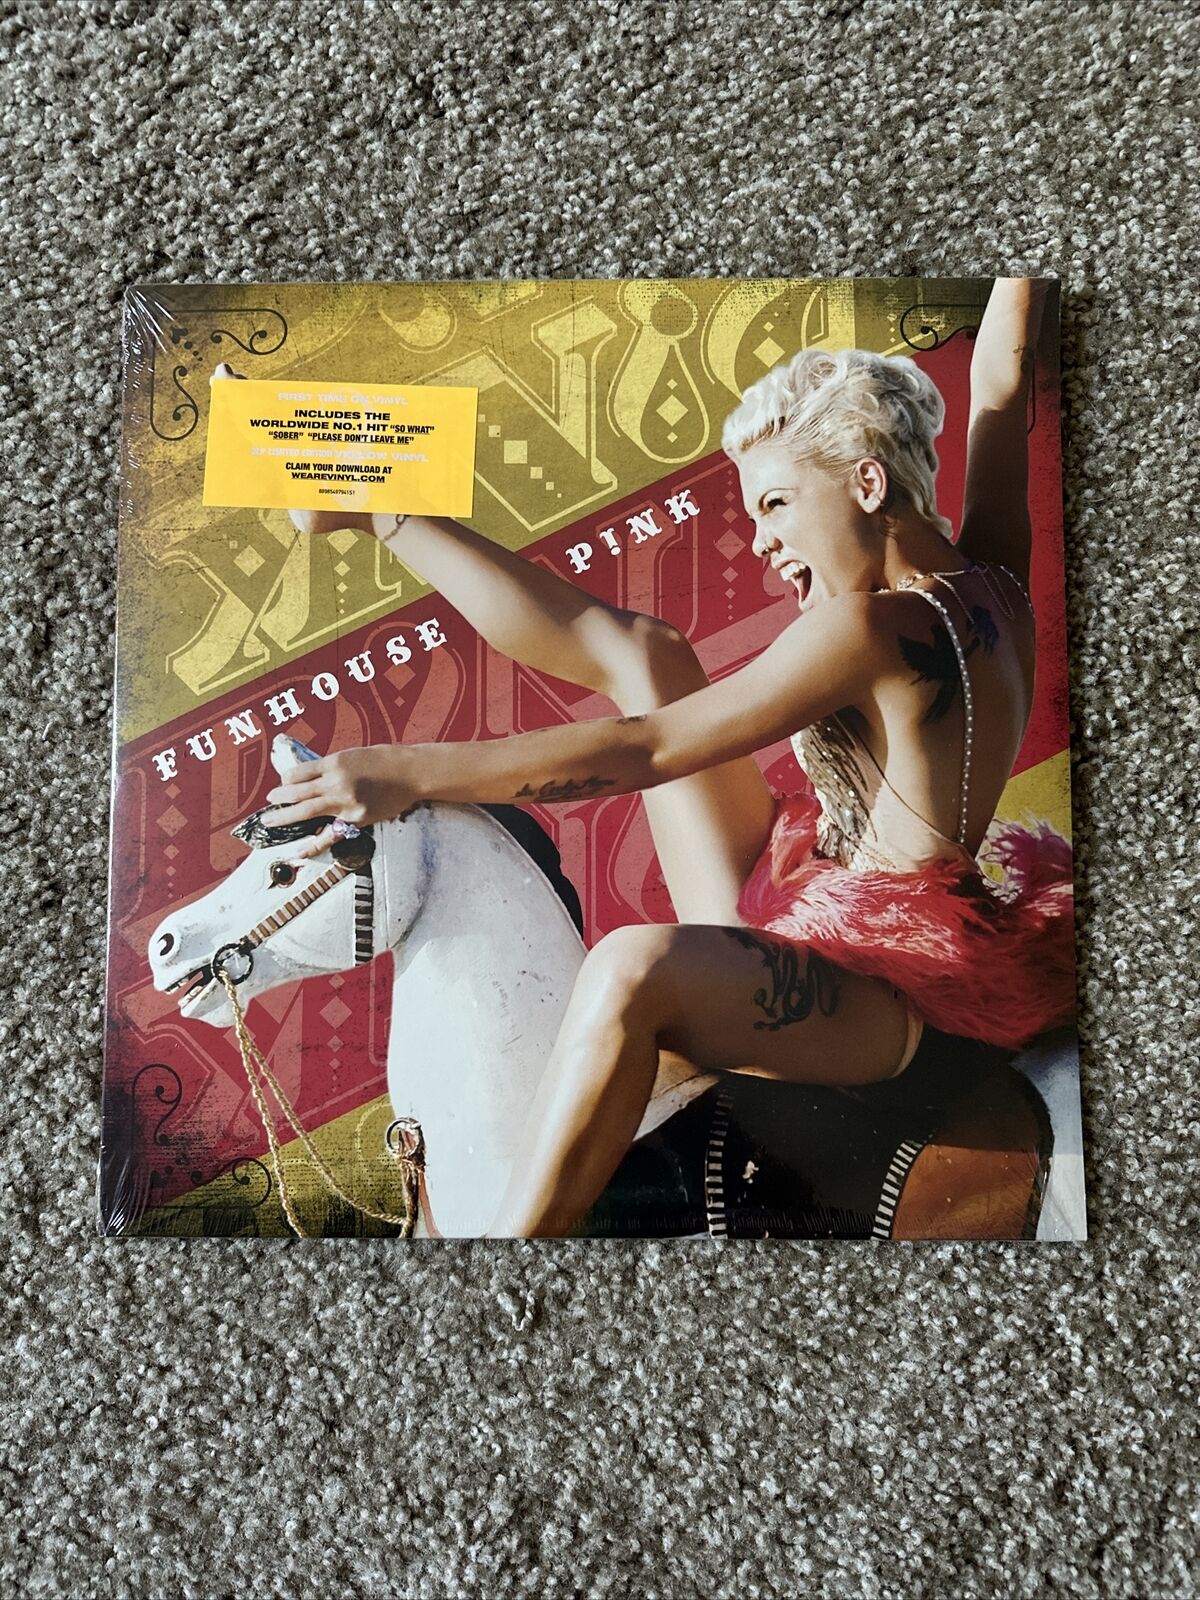 Pink - Funhouse Sealed (Limited Edition Yellow Vinyl, 2018) Unopened